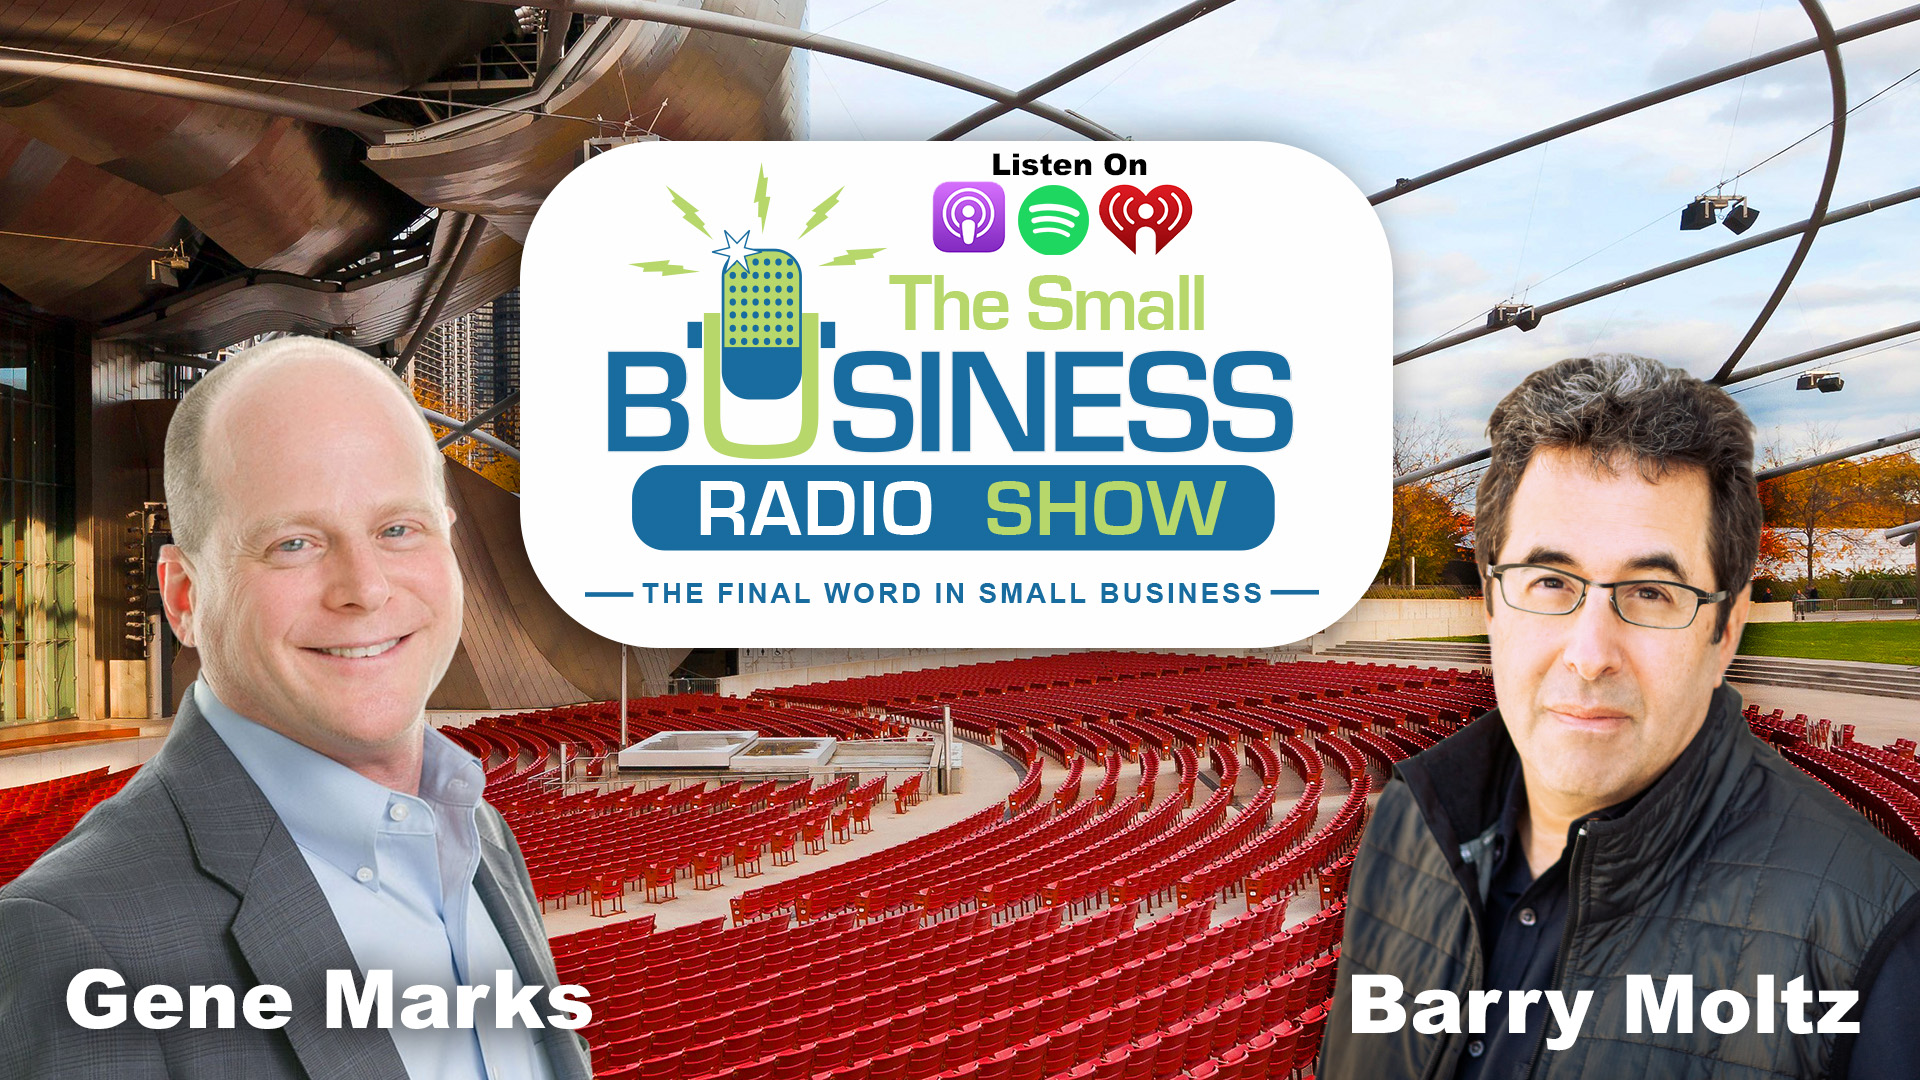 Gene Marks on The Small Business Radio Show